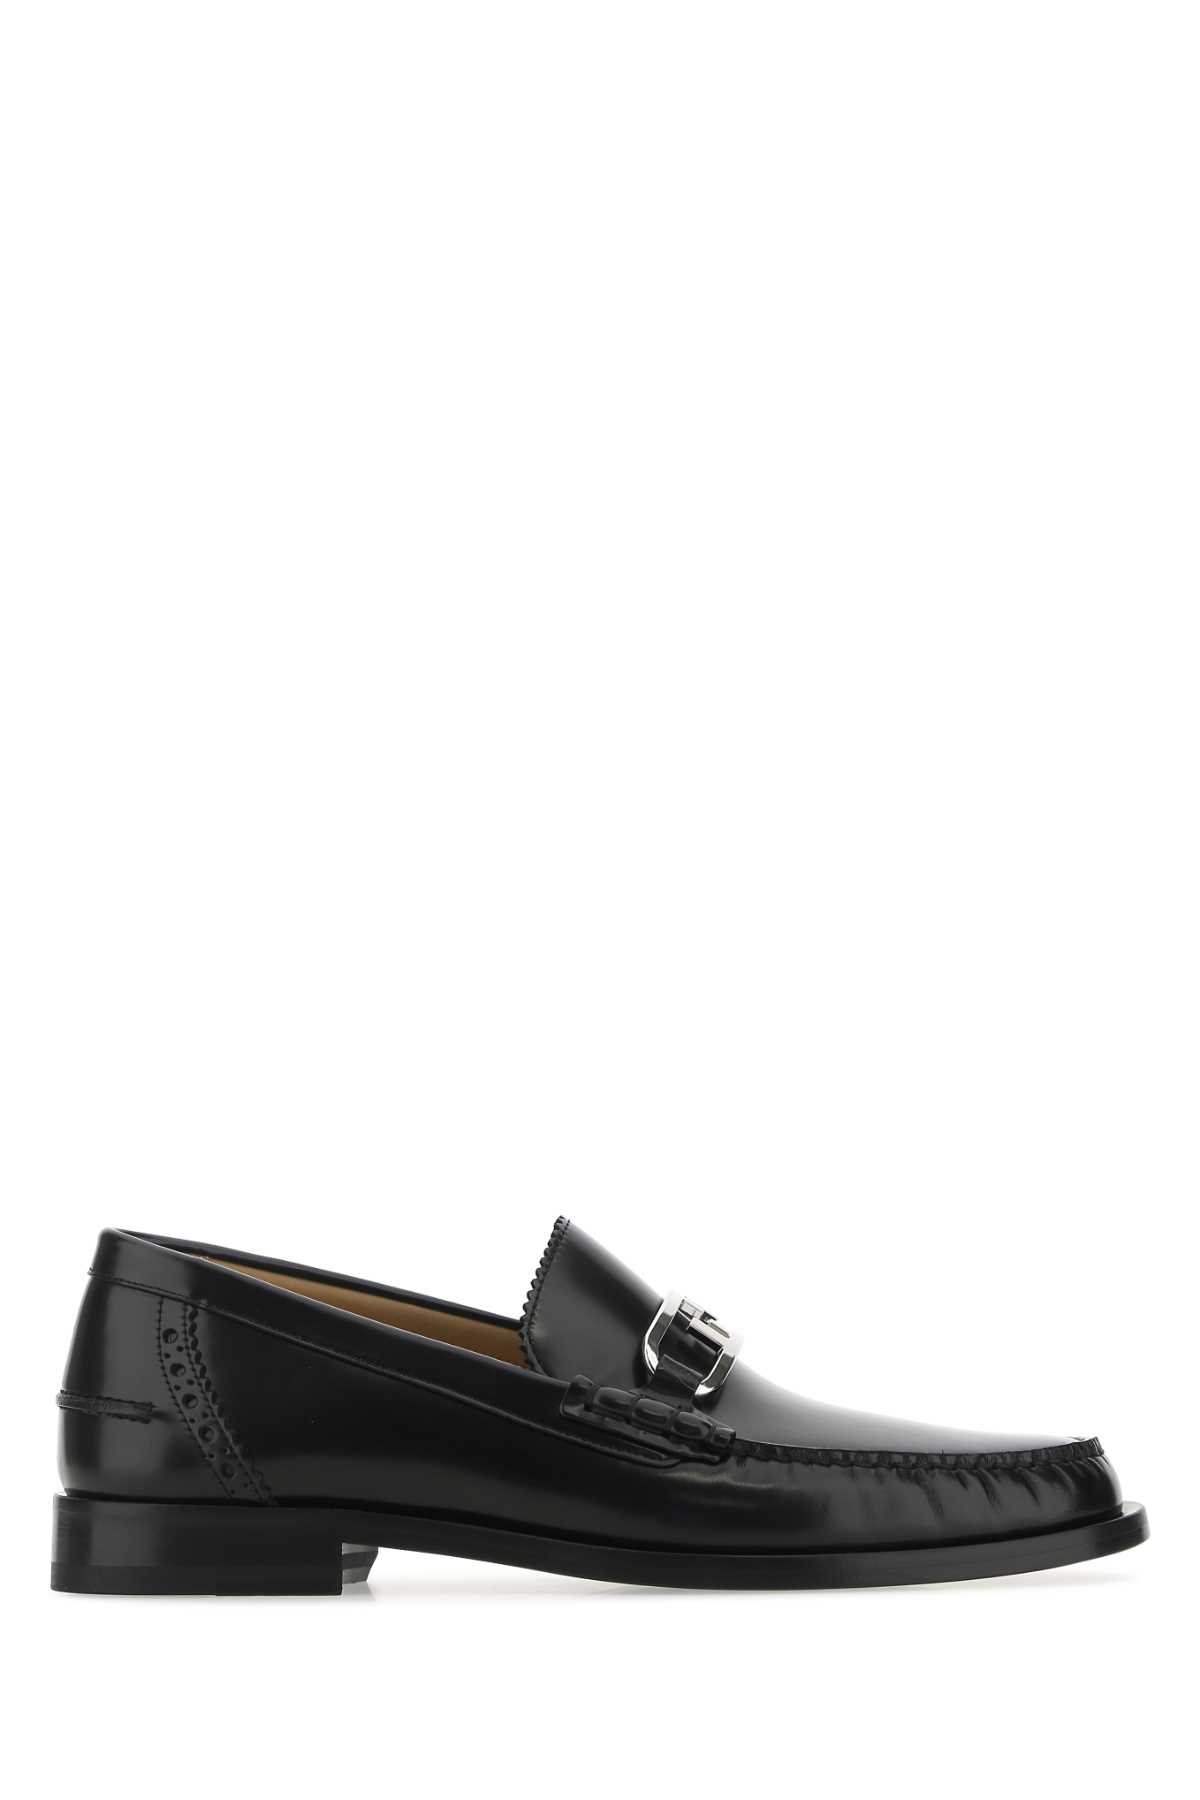 Fendi Black Leather Loafers In F0abb